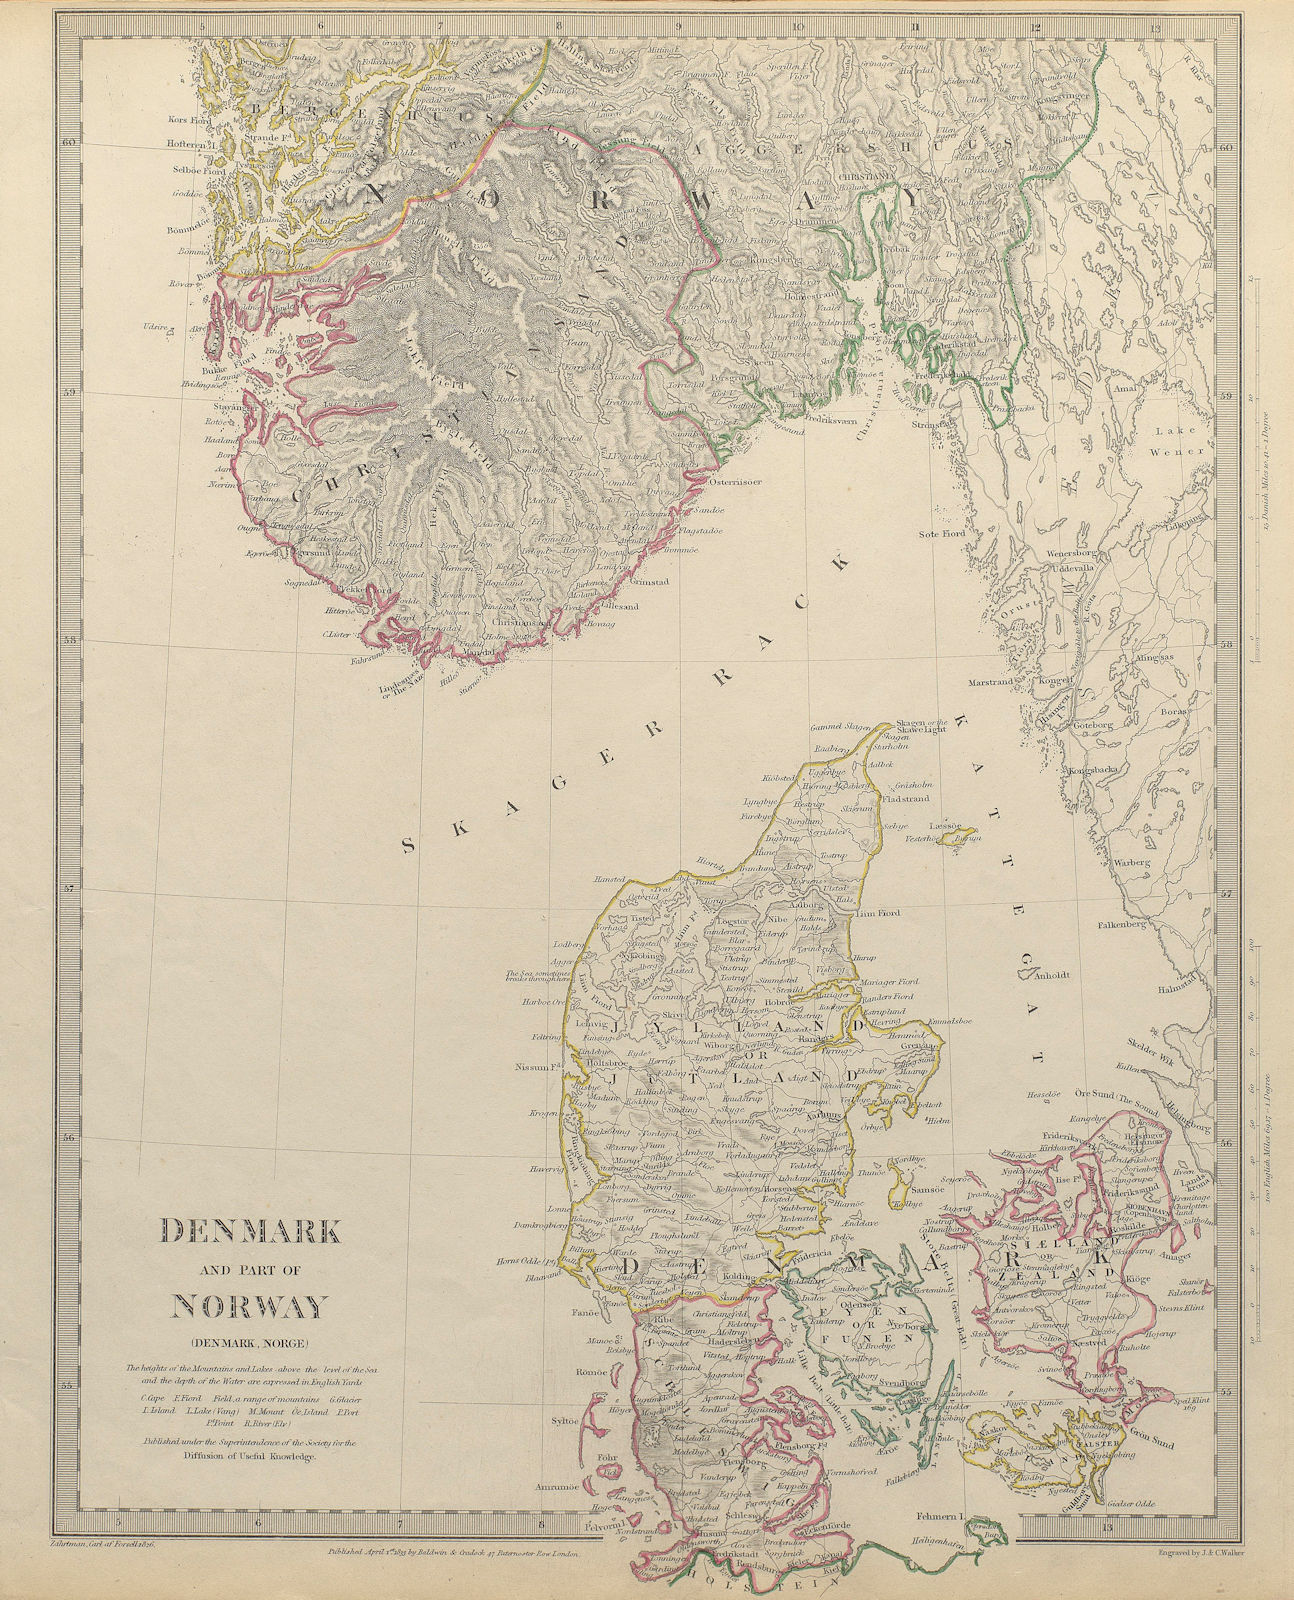 SCANDINAVIA. Denmark and Southern Norway (Norge) . SDUK 1844 old antique map